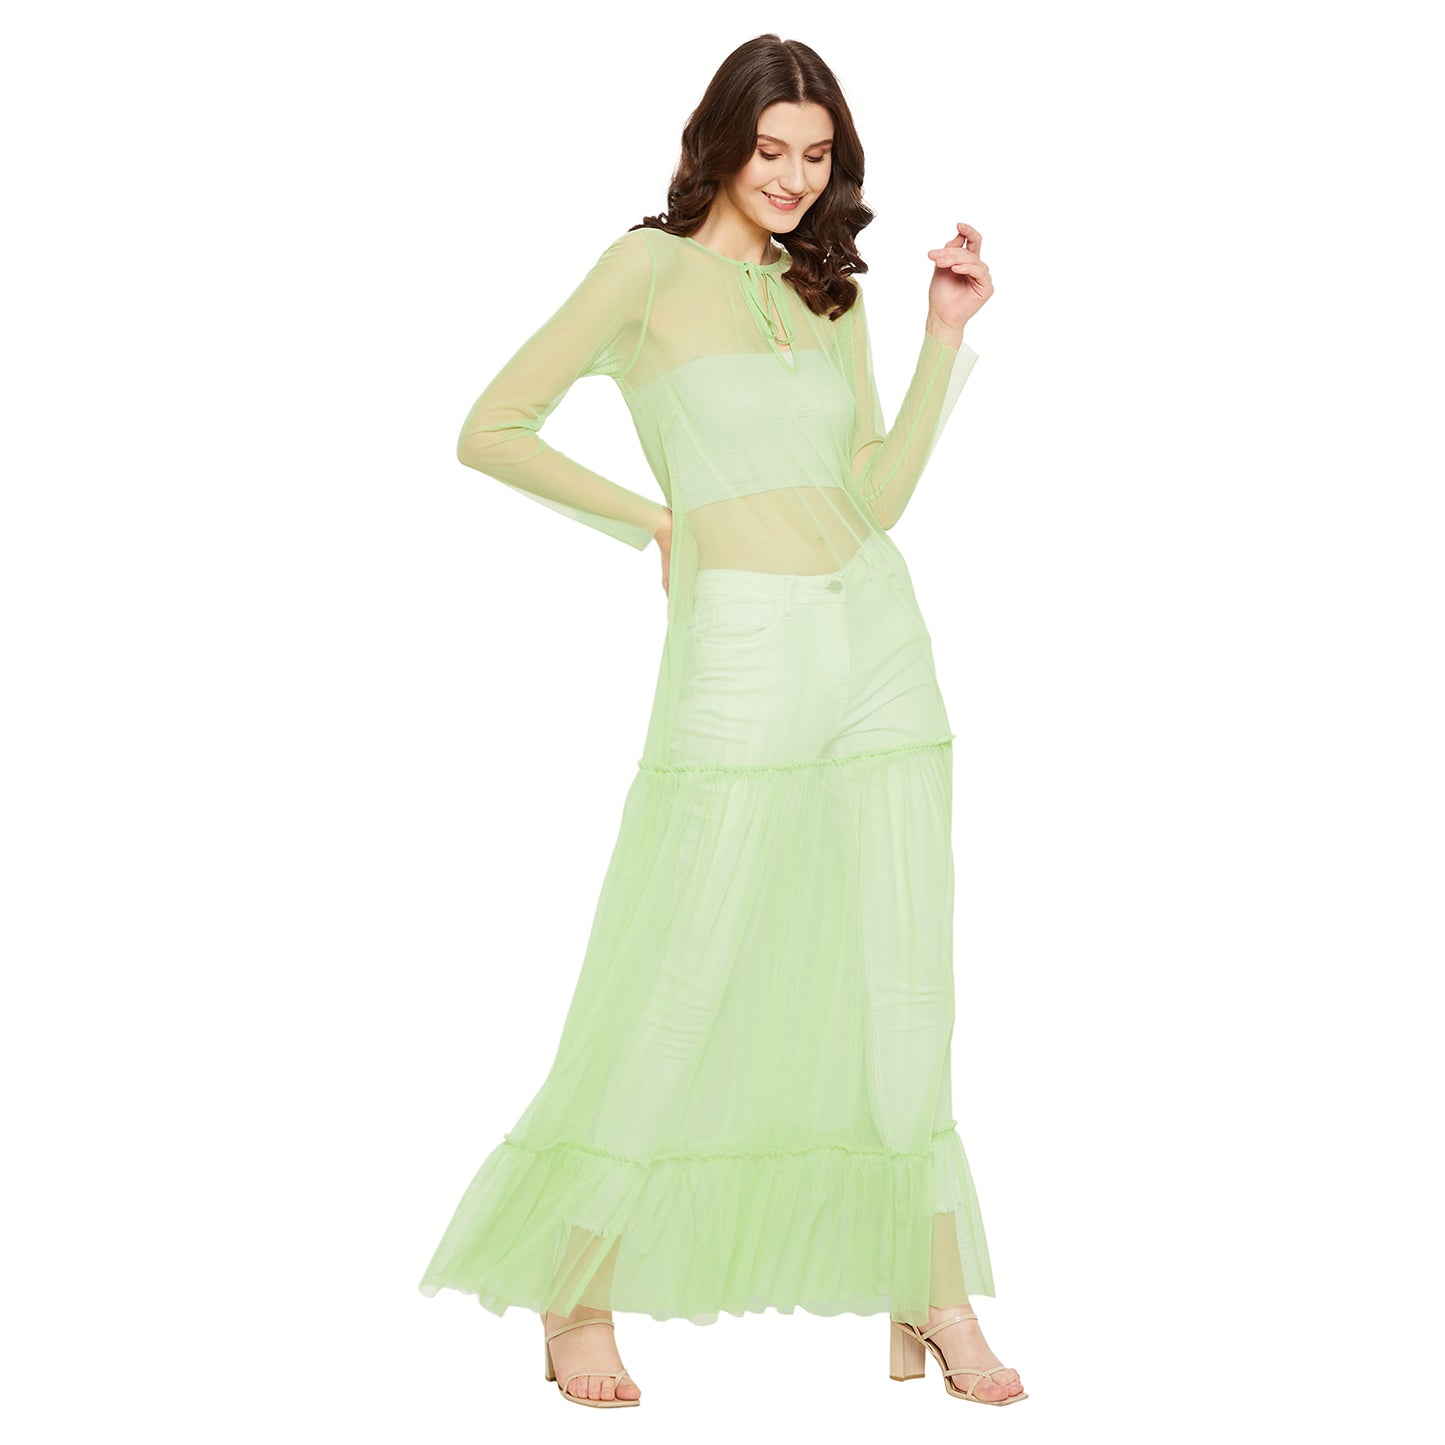 LY2 Parrot Green Tulle Dress